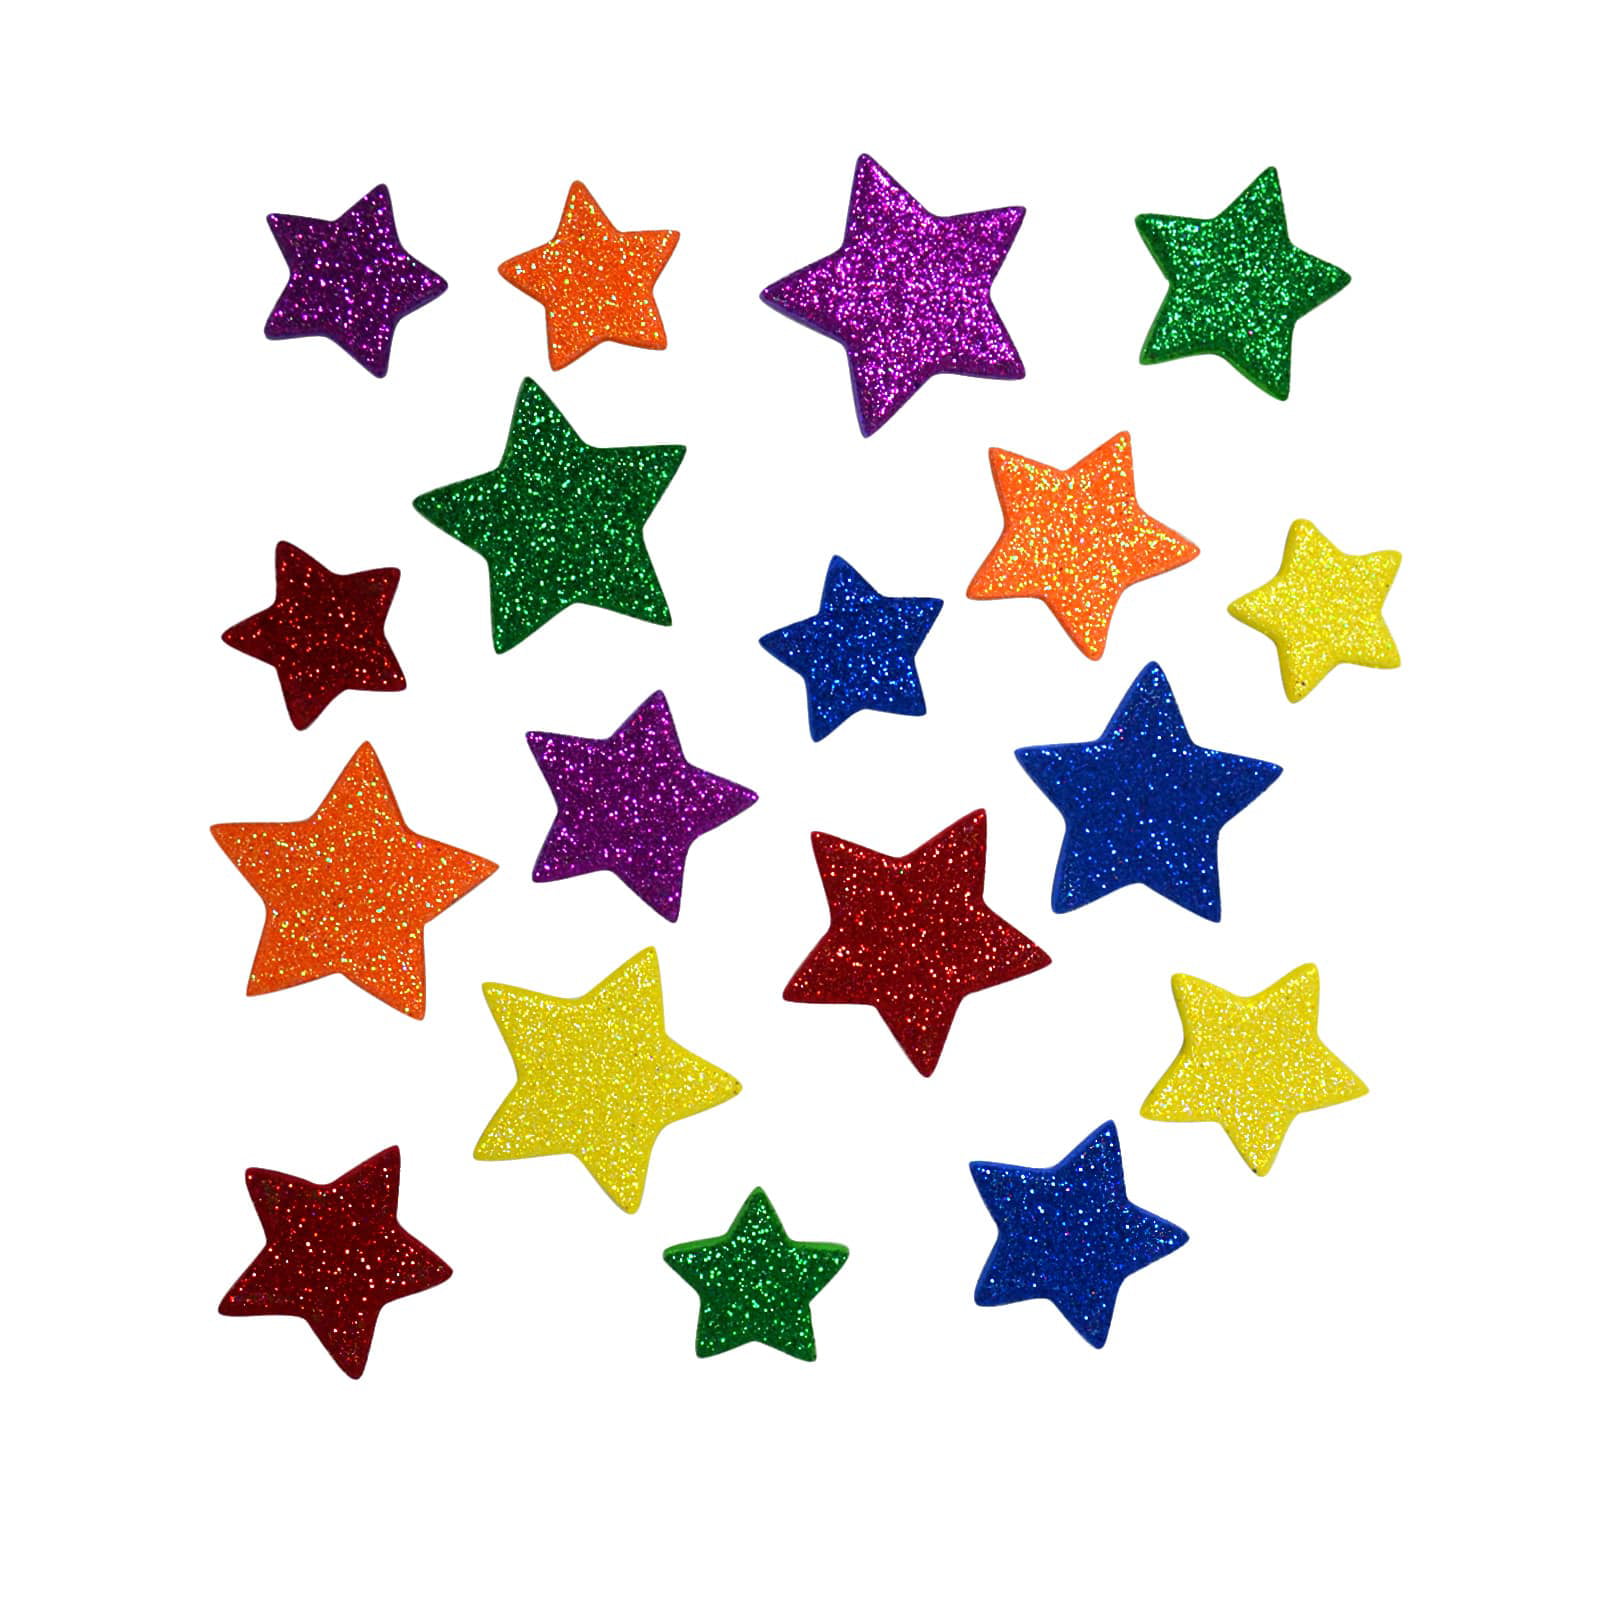 12 Packs: 150 ct. (1,800 total) Glitter Star Foam Stickers by Creatology™